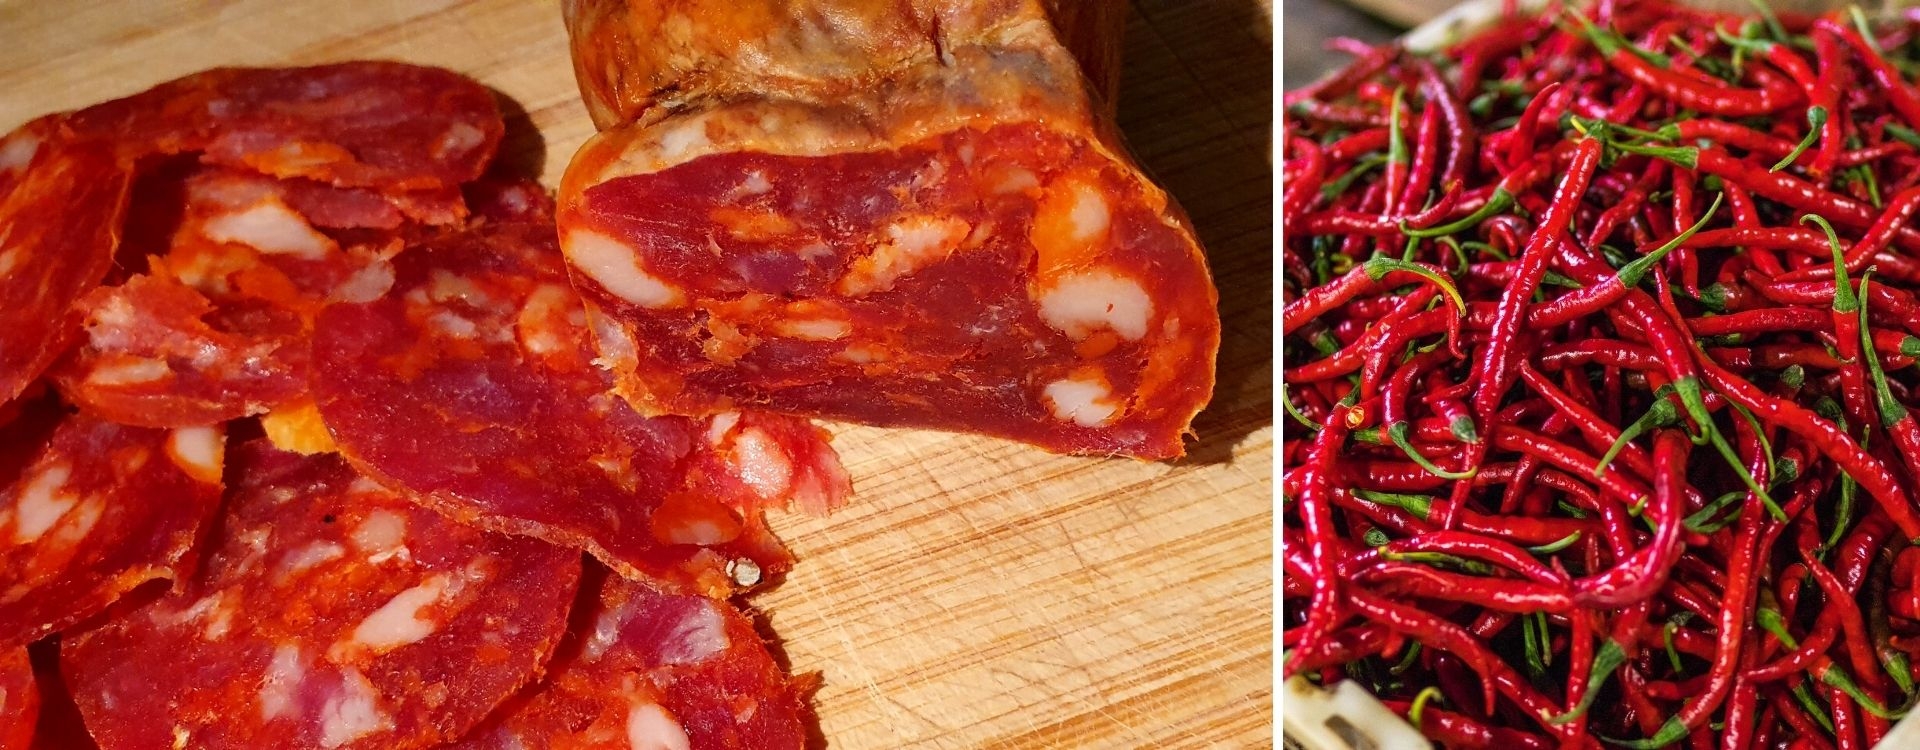 ITALIAN SPICY COLD CUTS: VENTRICINA SALAMI AND MUCH MORE